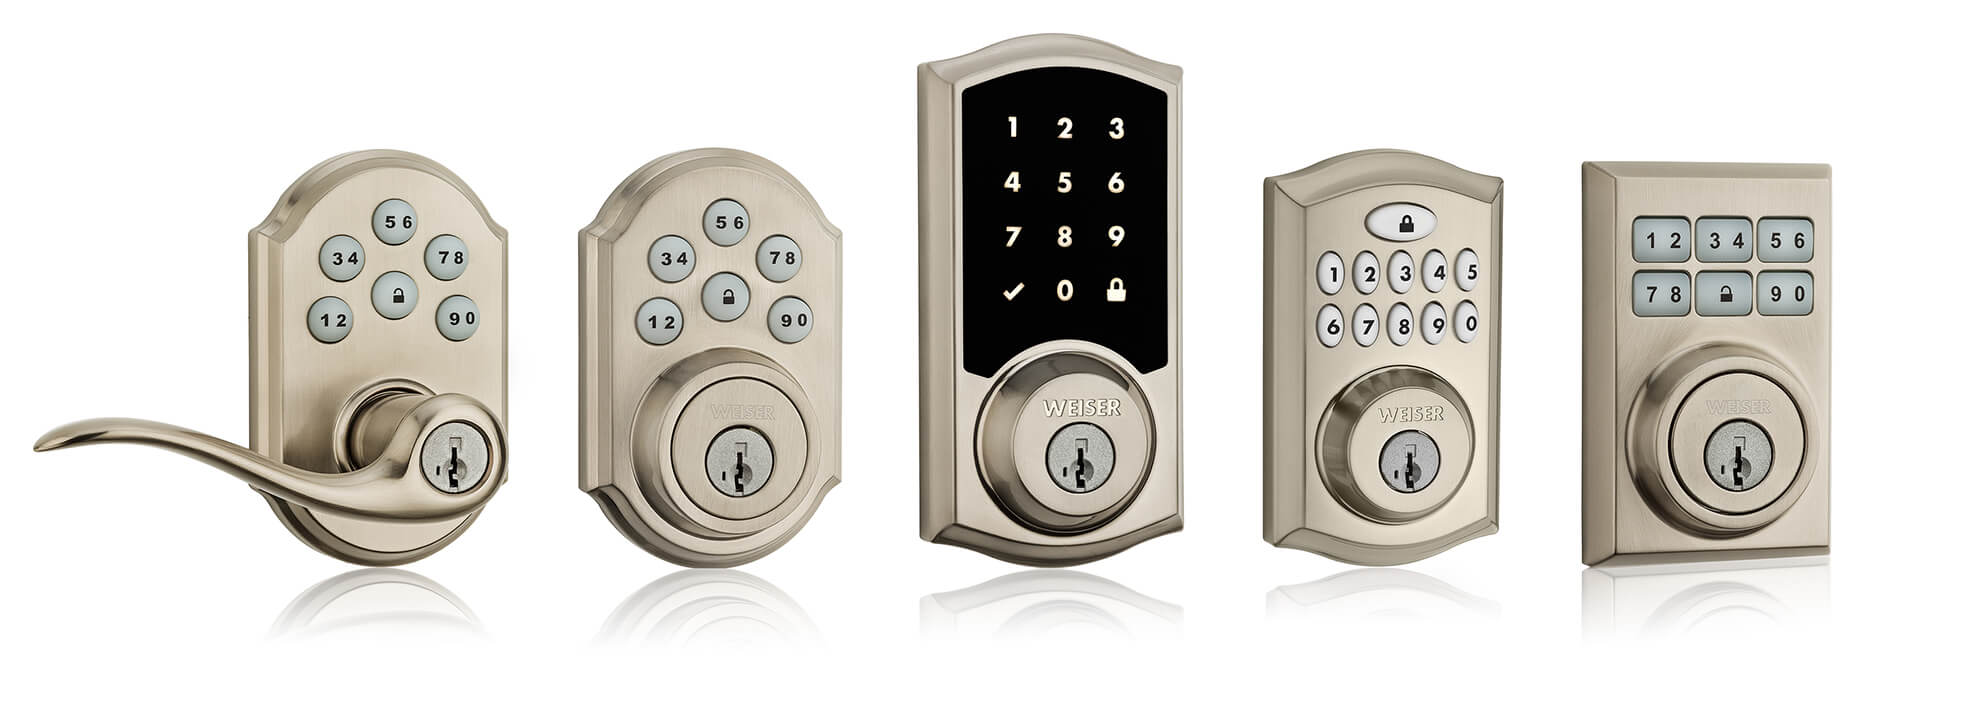 The full family of Smartcode Electronic locks 